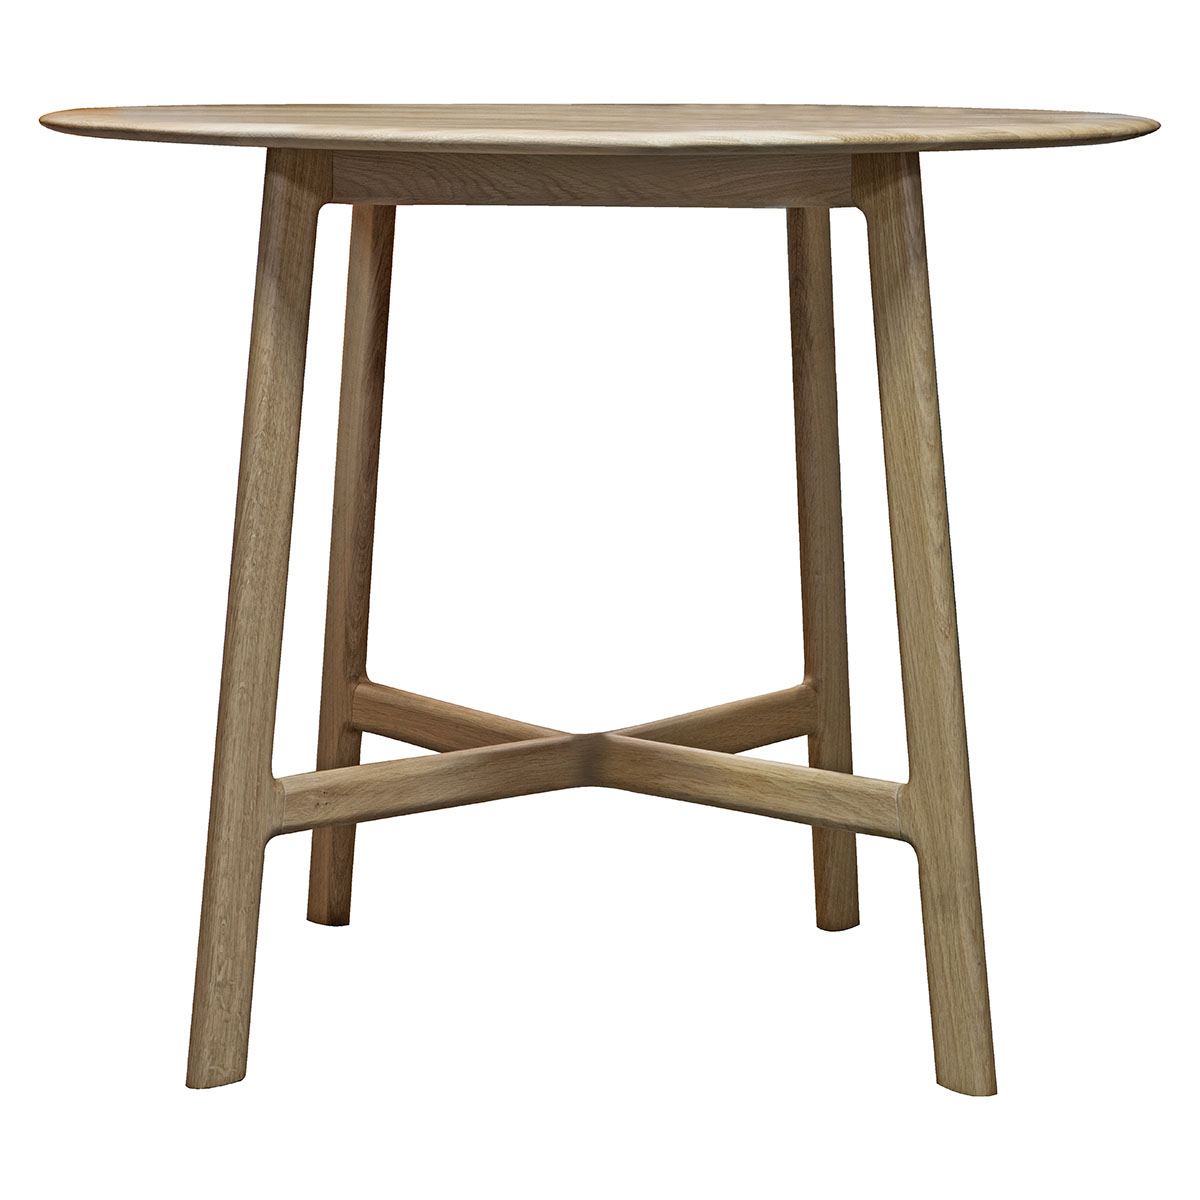 Madrid Round Dining Table 1000x1000x750mm